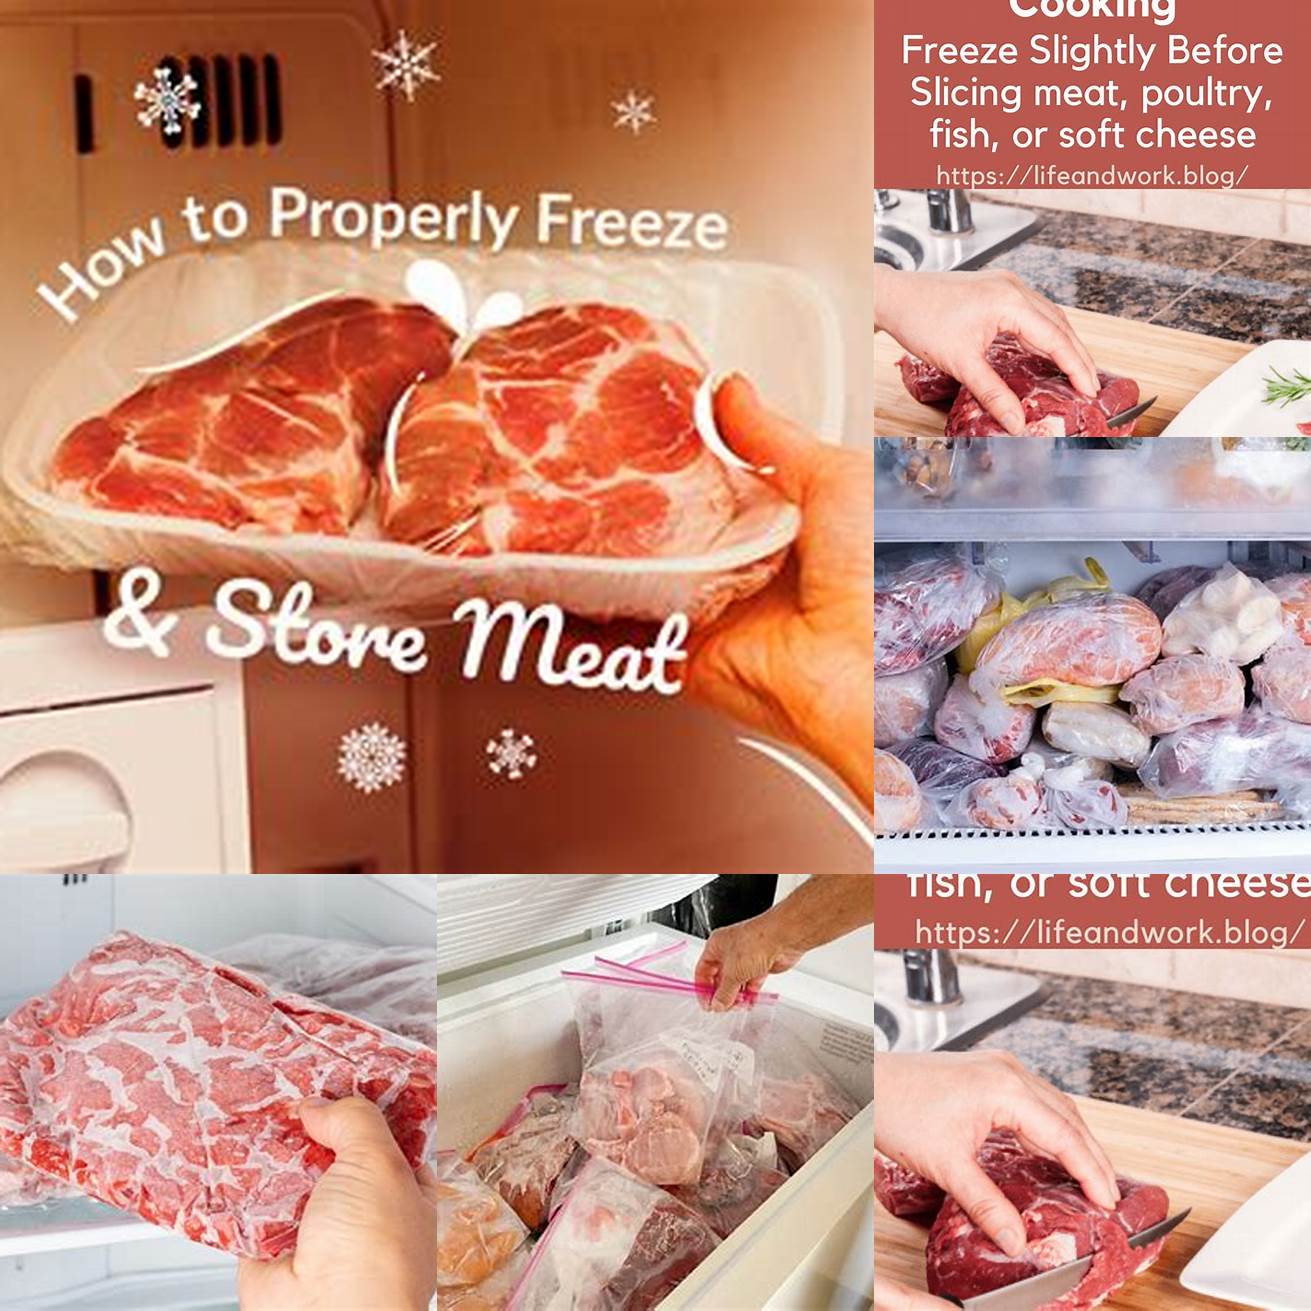 Freeze your meat slightly before cutting